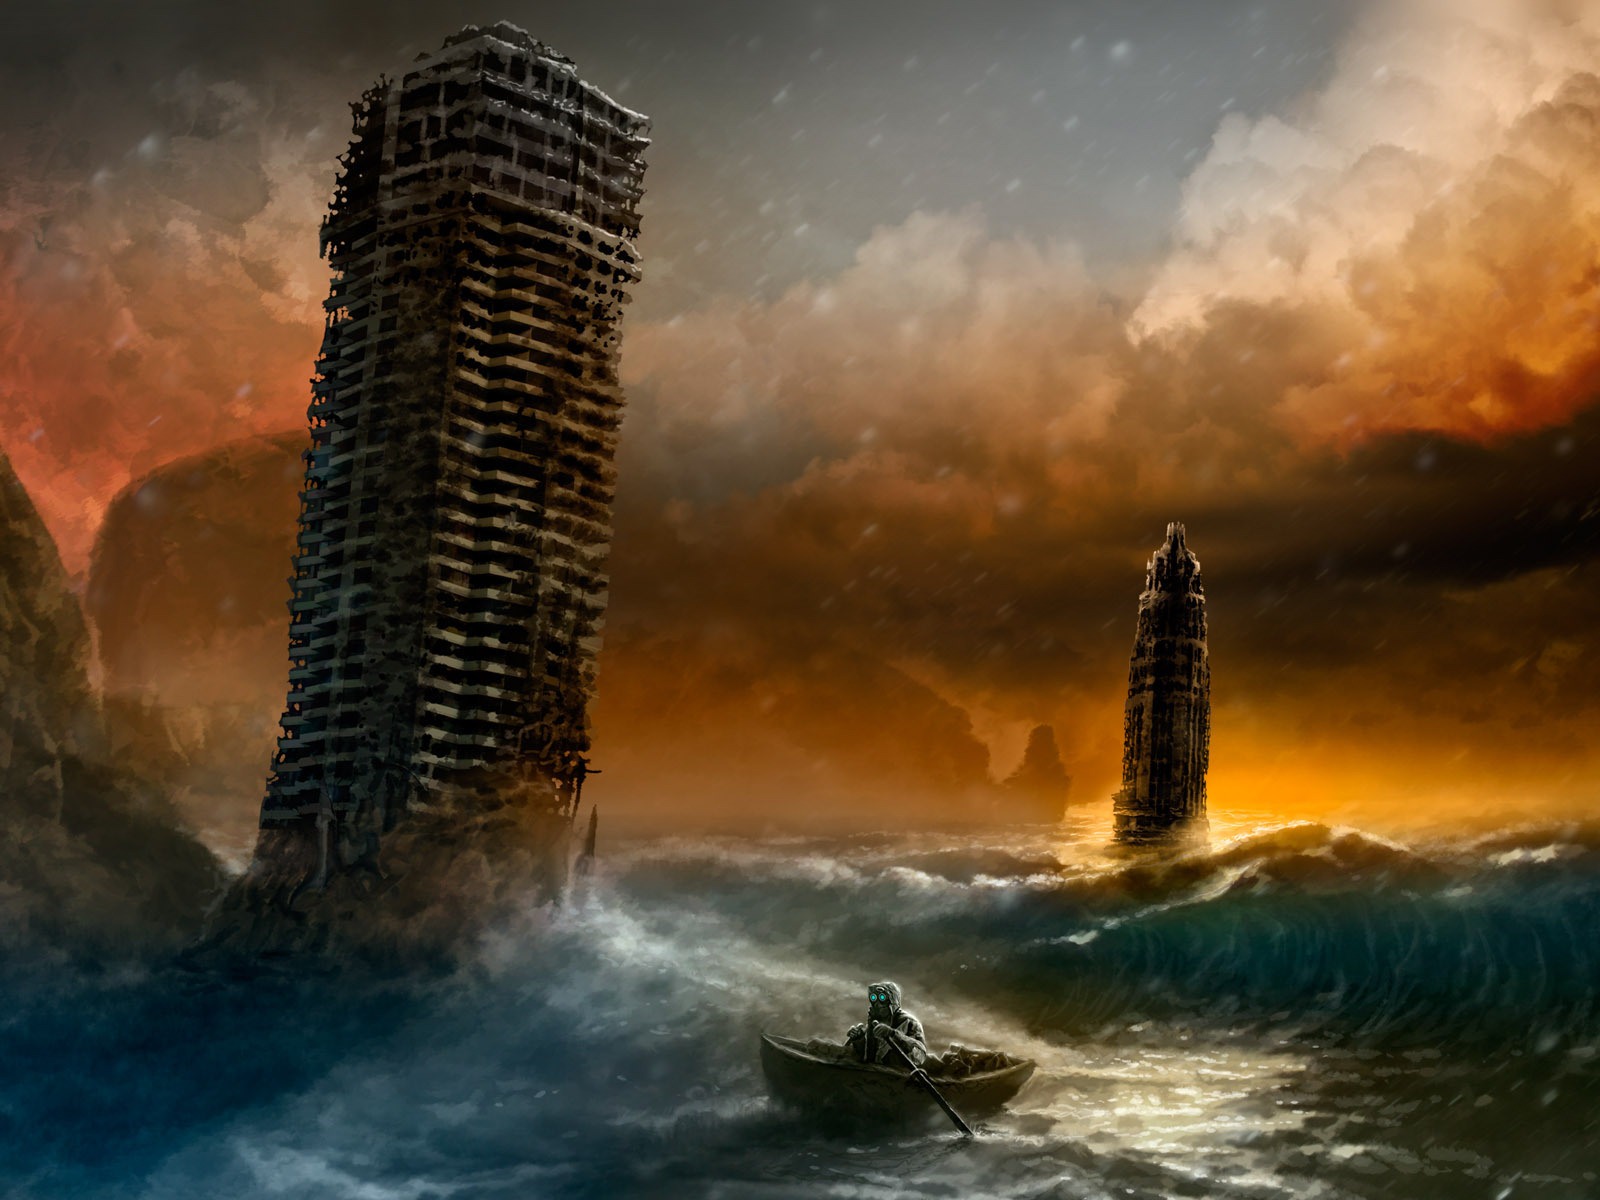 Romantically Apocalyptic creative painting wallpapers (1) #8 - 1600x1200